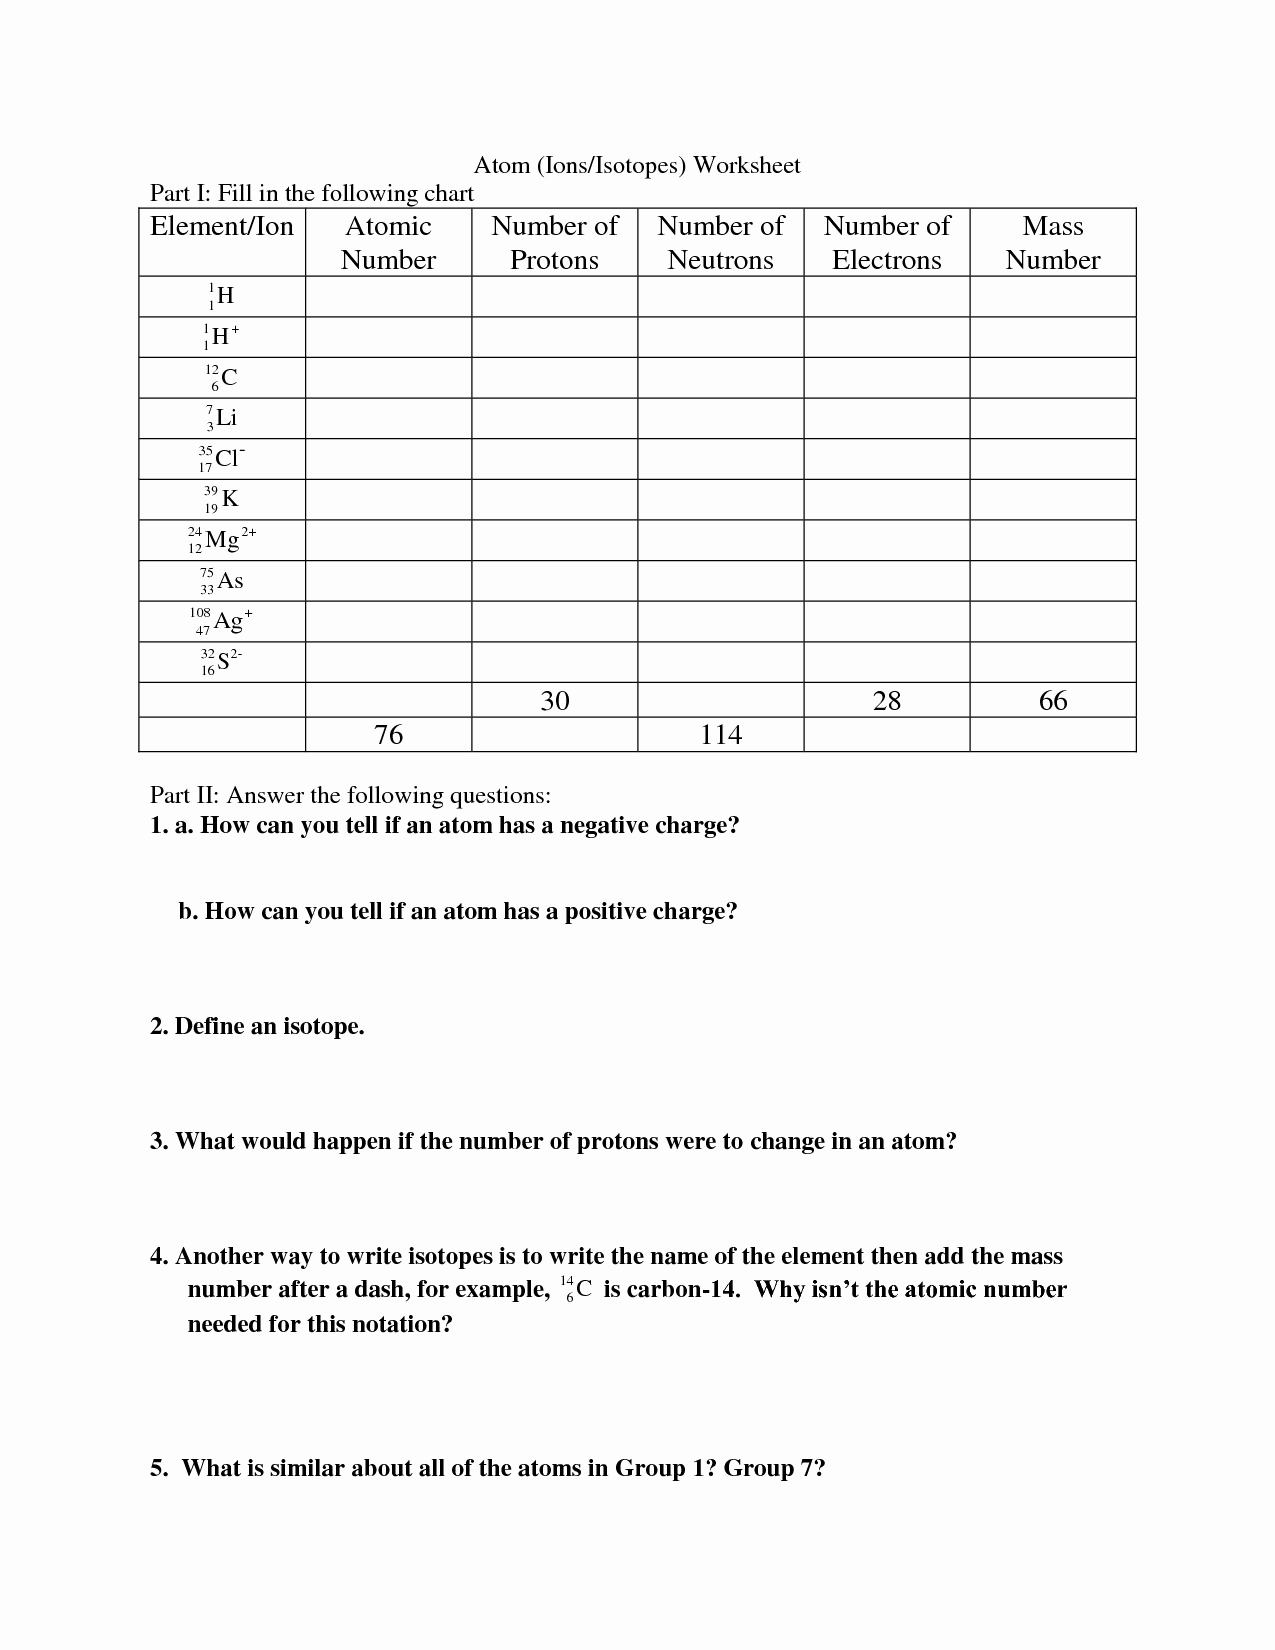 Atoms and isotopes Worksheet Unique 16 Best Of Molecules and atoms Worksheet Answer Key